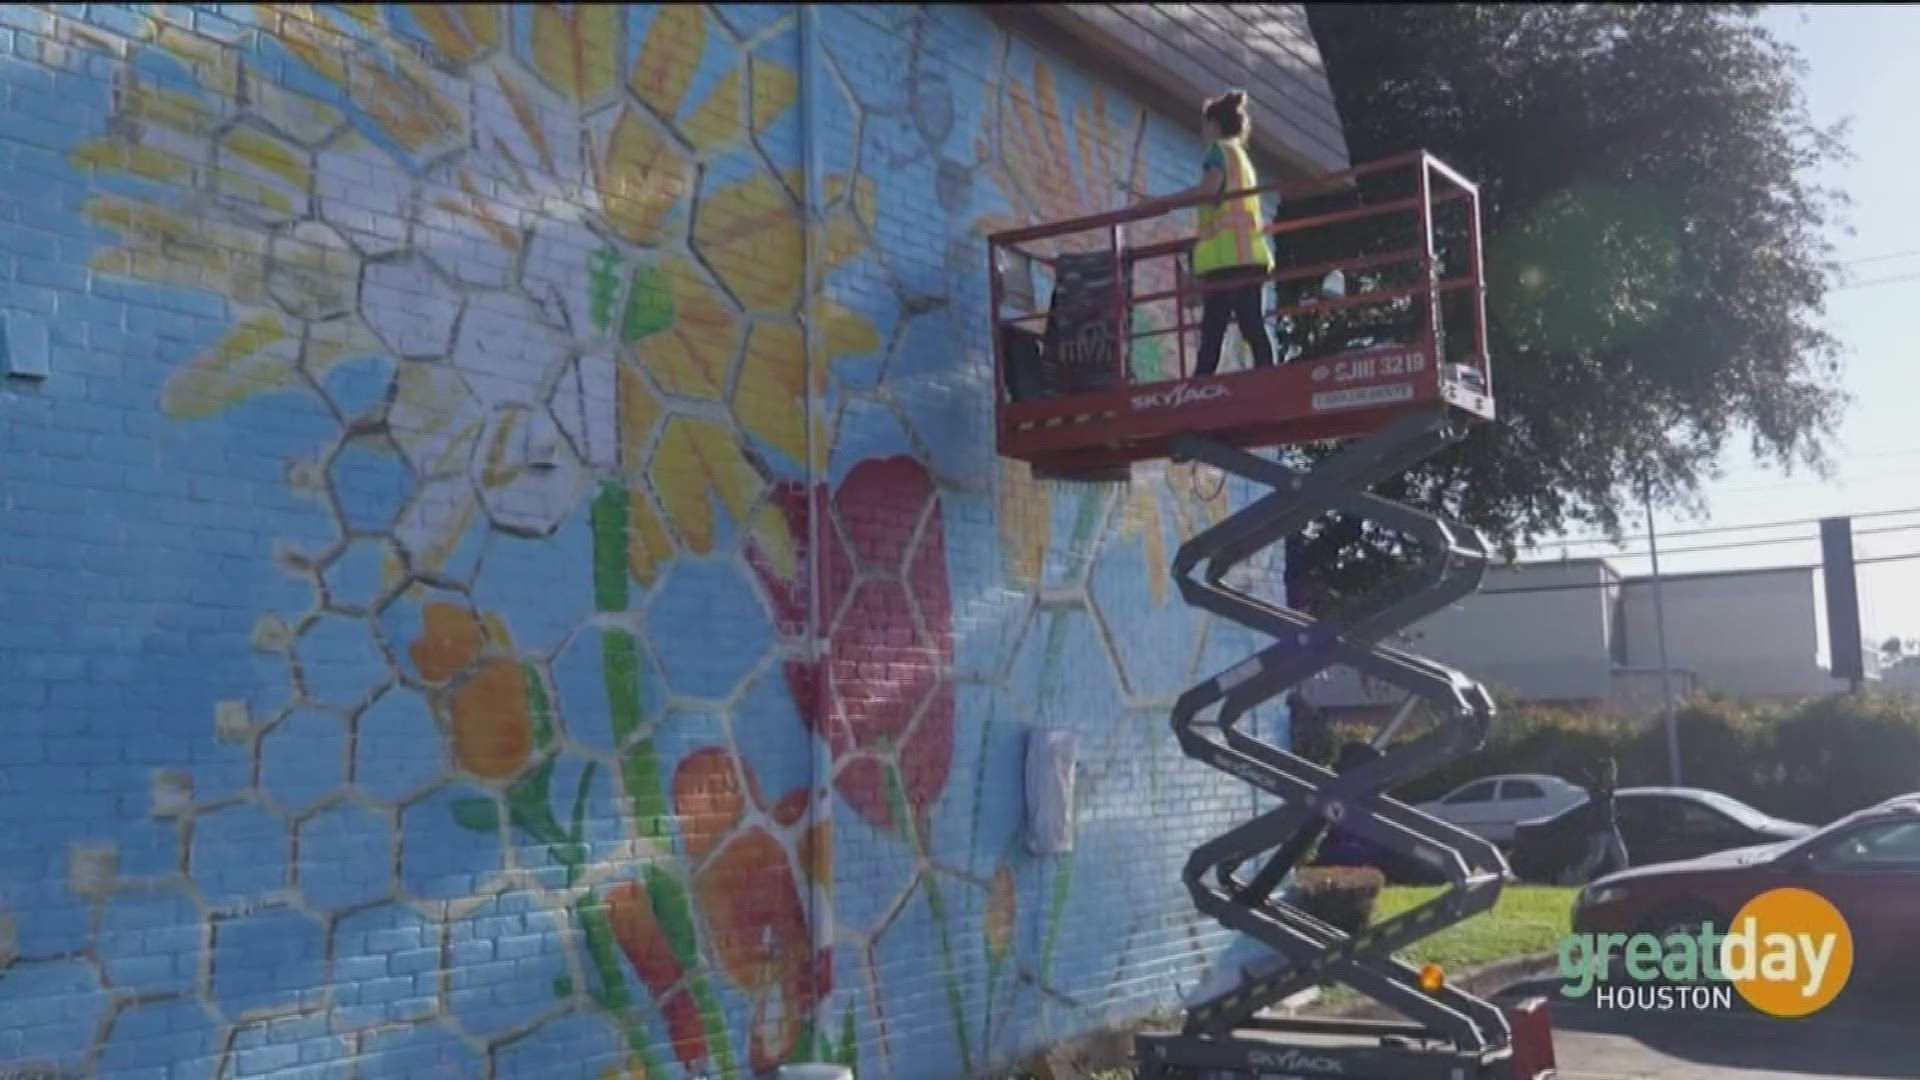 The mural project has brought 12 new murals to Houston.